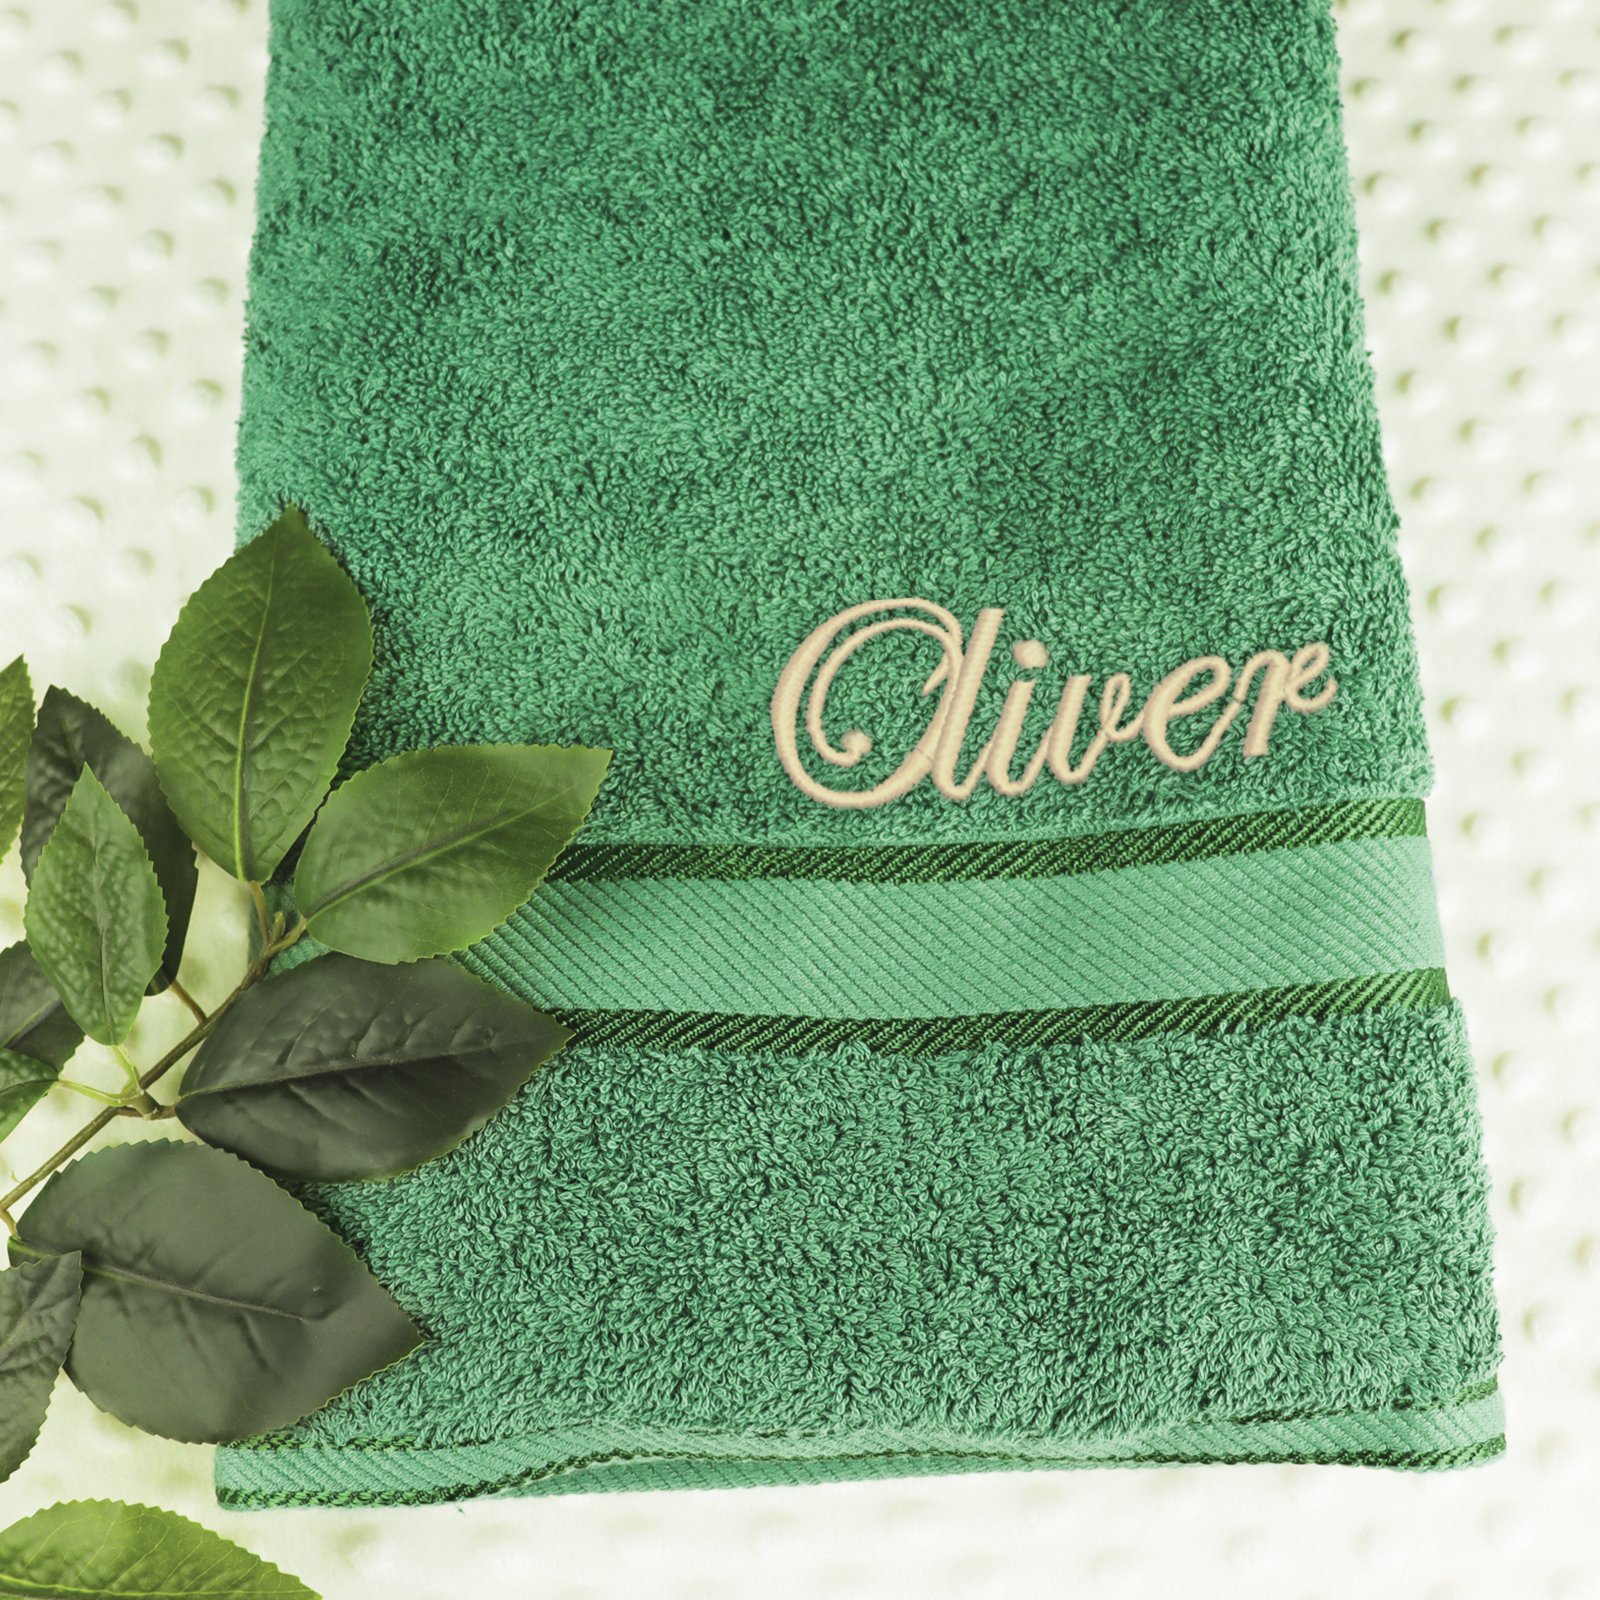 Forest green personalised bath towel